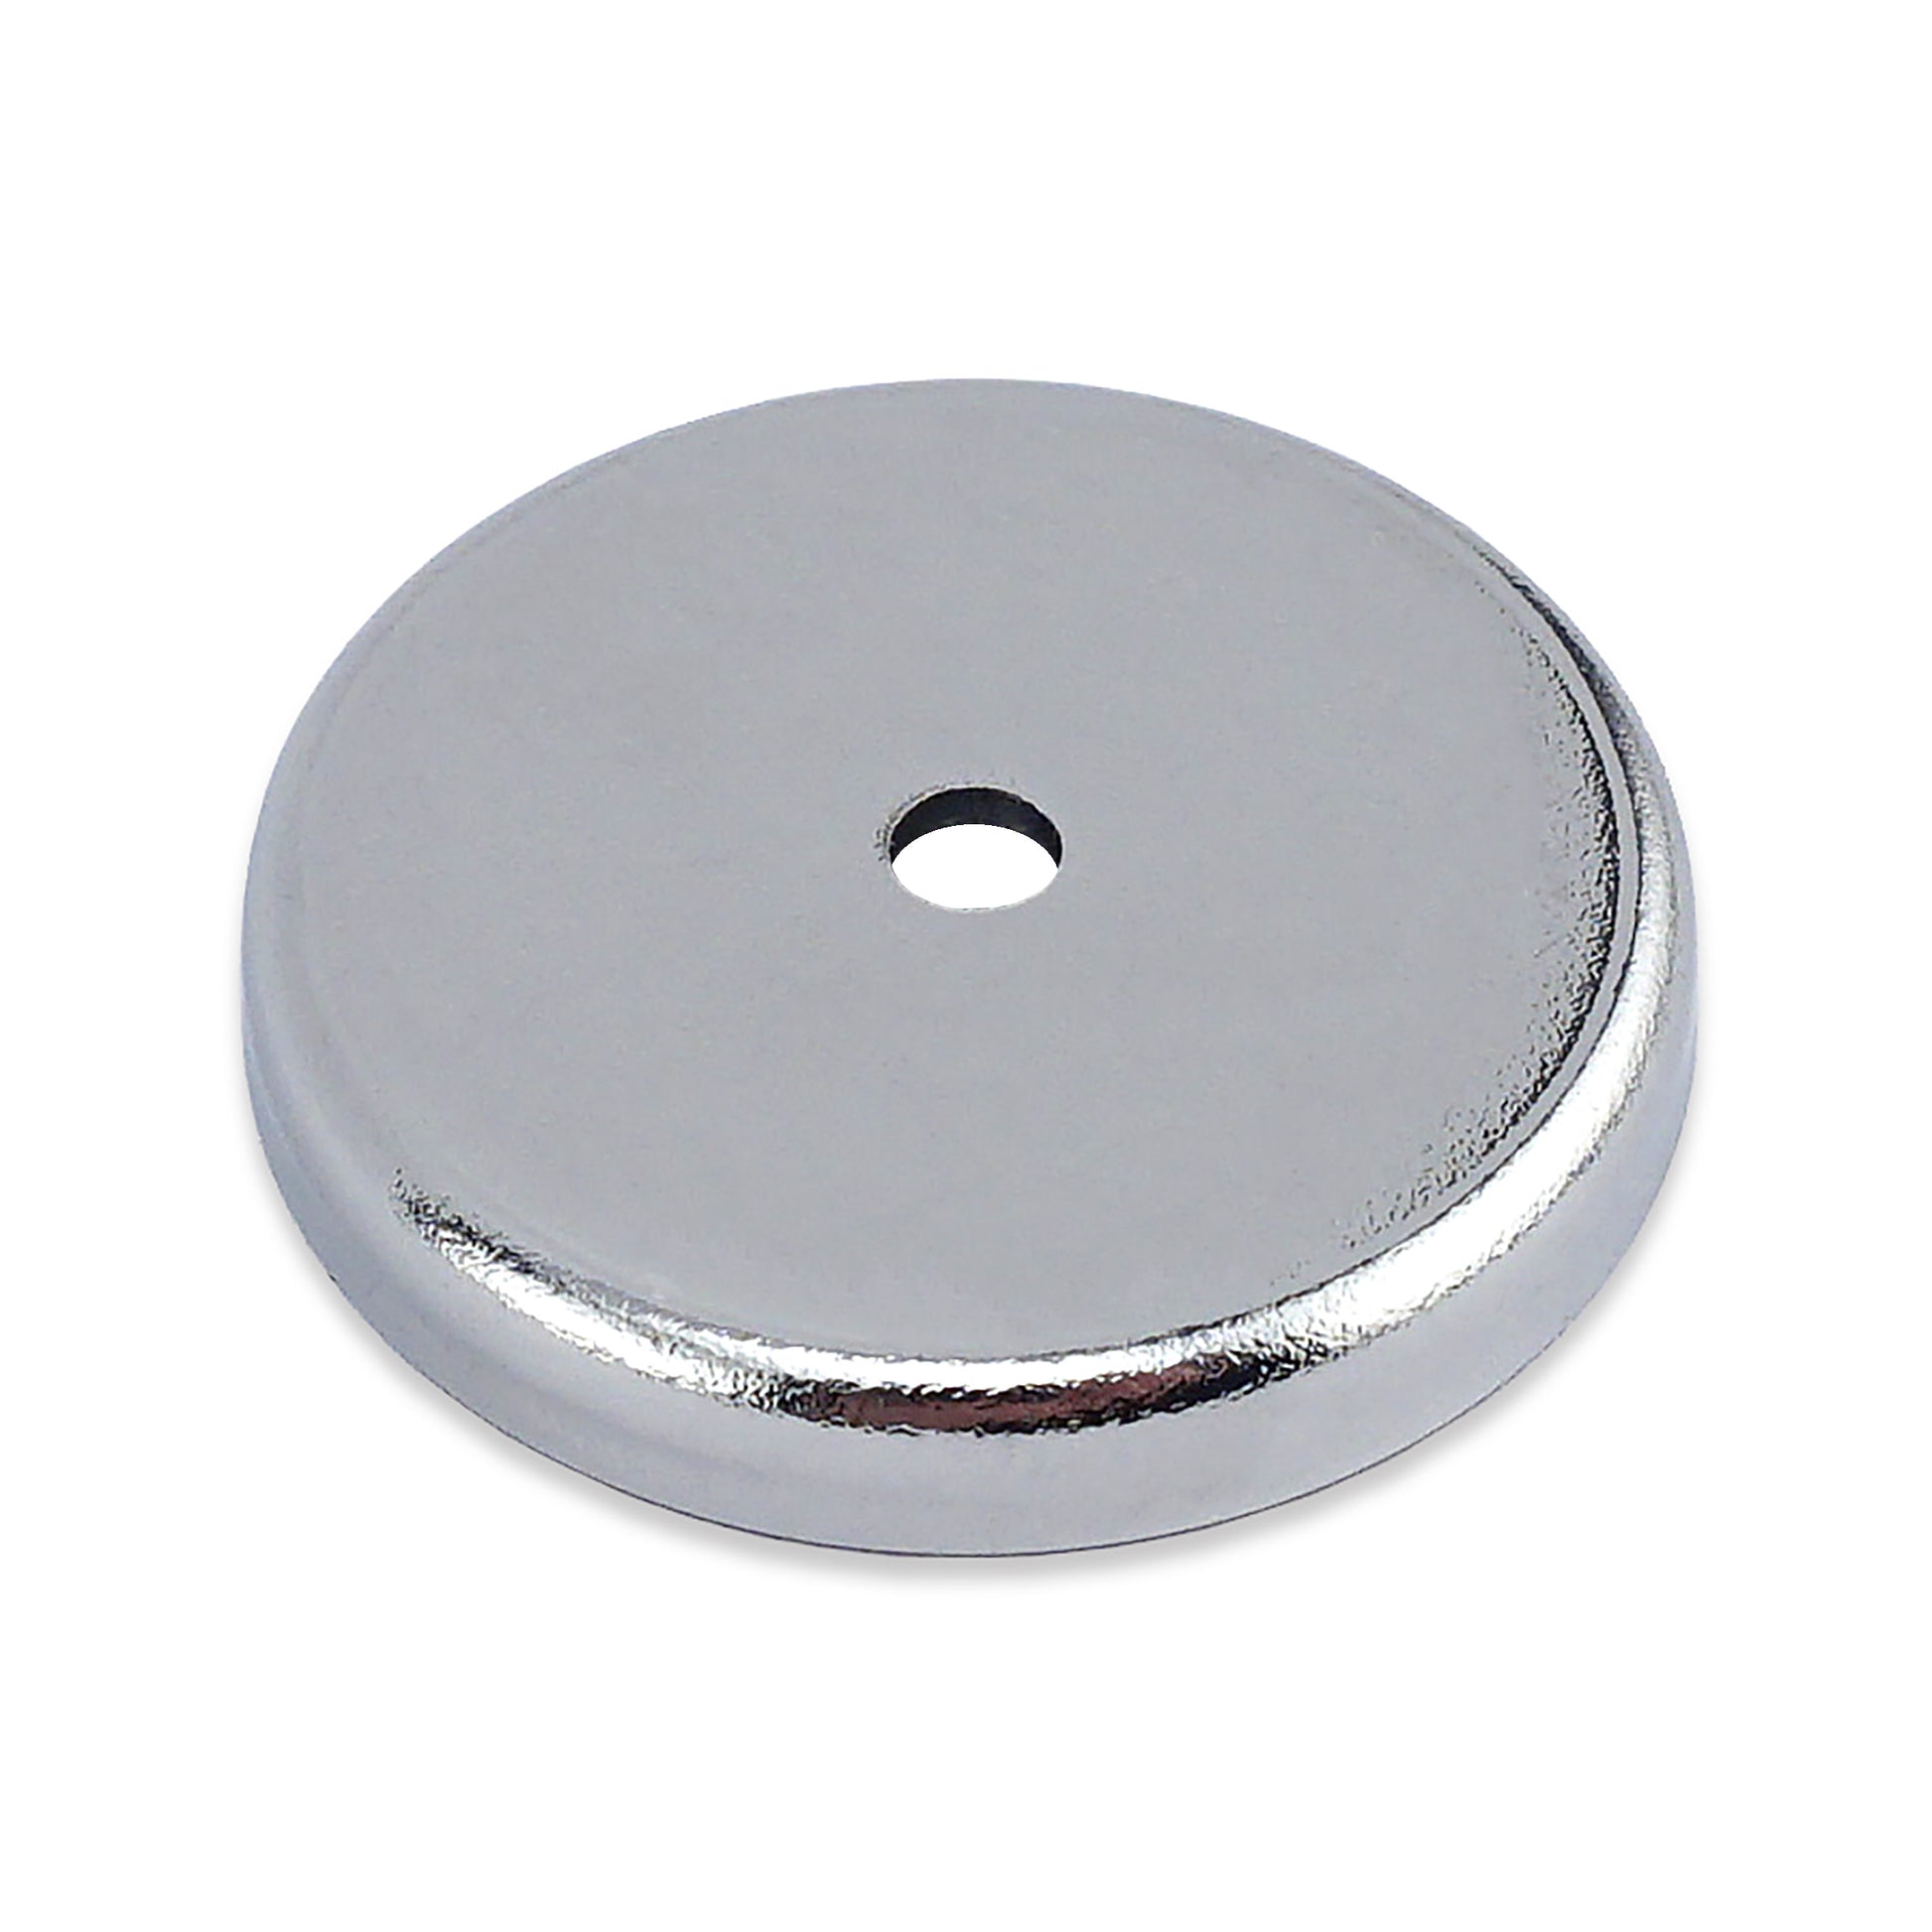 Load image into Gallery viewer, 07605 Super Blue™ Neodymium Round Base Magnet - Top View